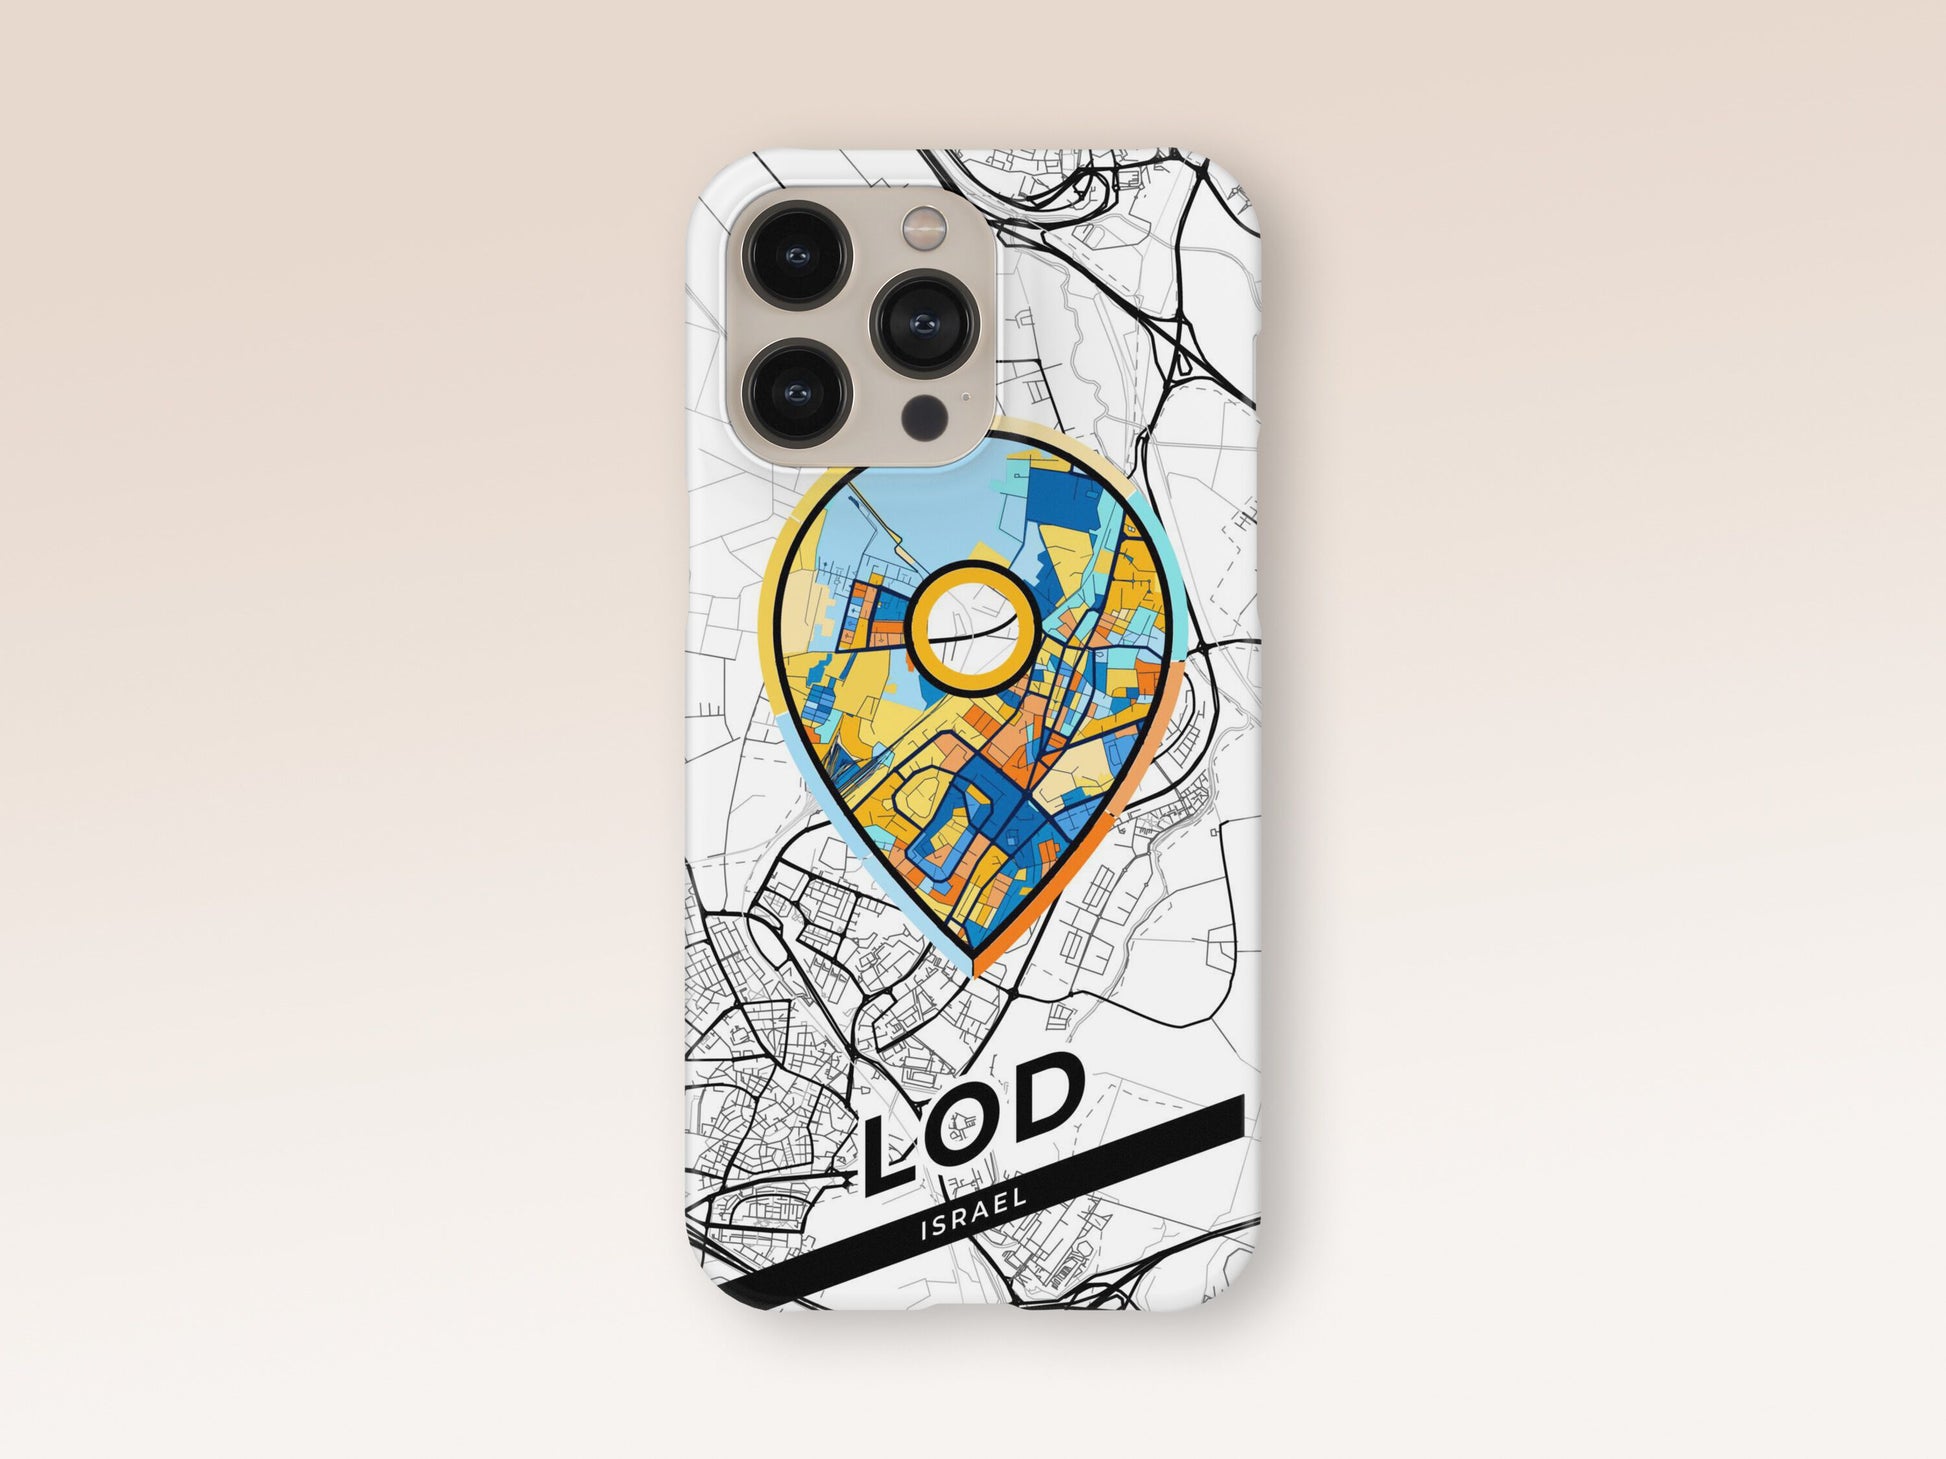 Lod Israel slim phone case with colorful icon. Birthday, wedding or housewarming gift. Couple match cases. 1